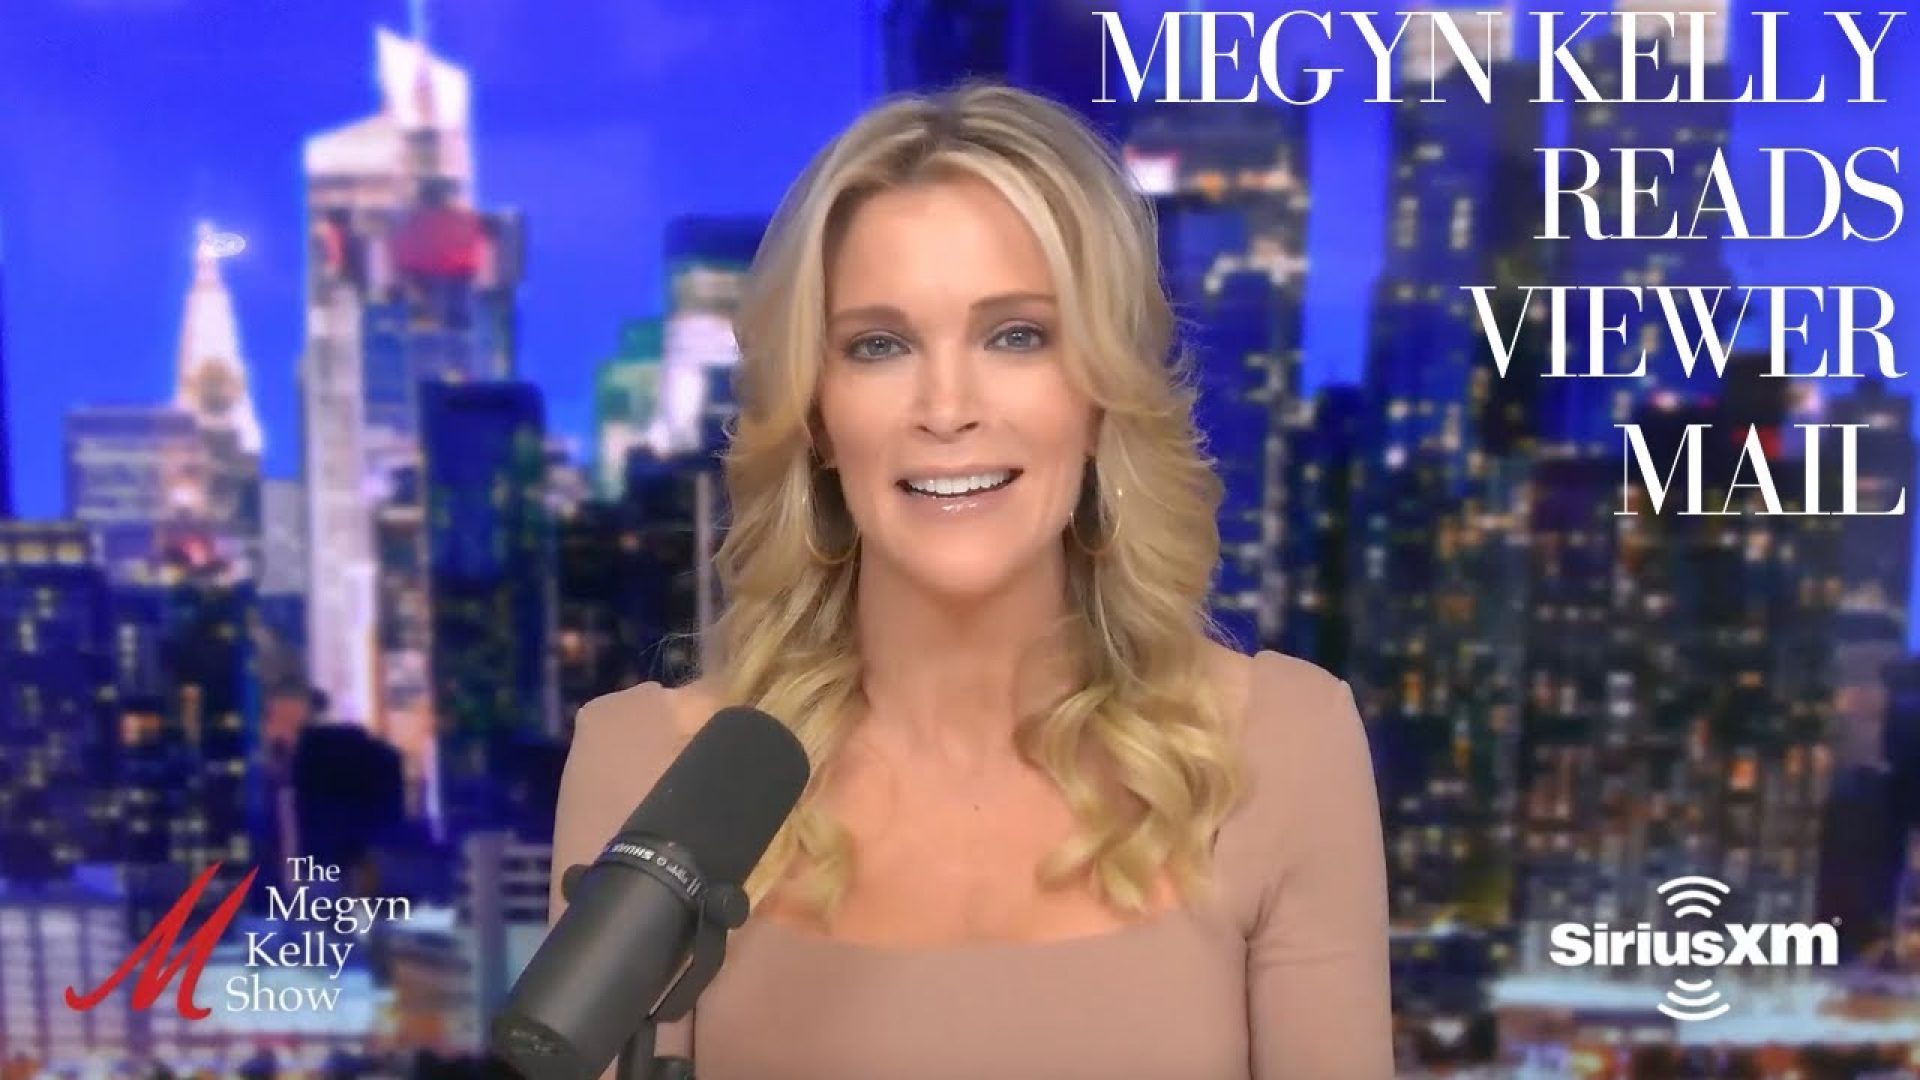 Megyn Kelly Podcast Spotify: Who’s She and How to Listen to Her?